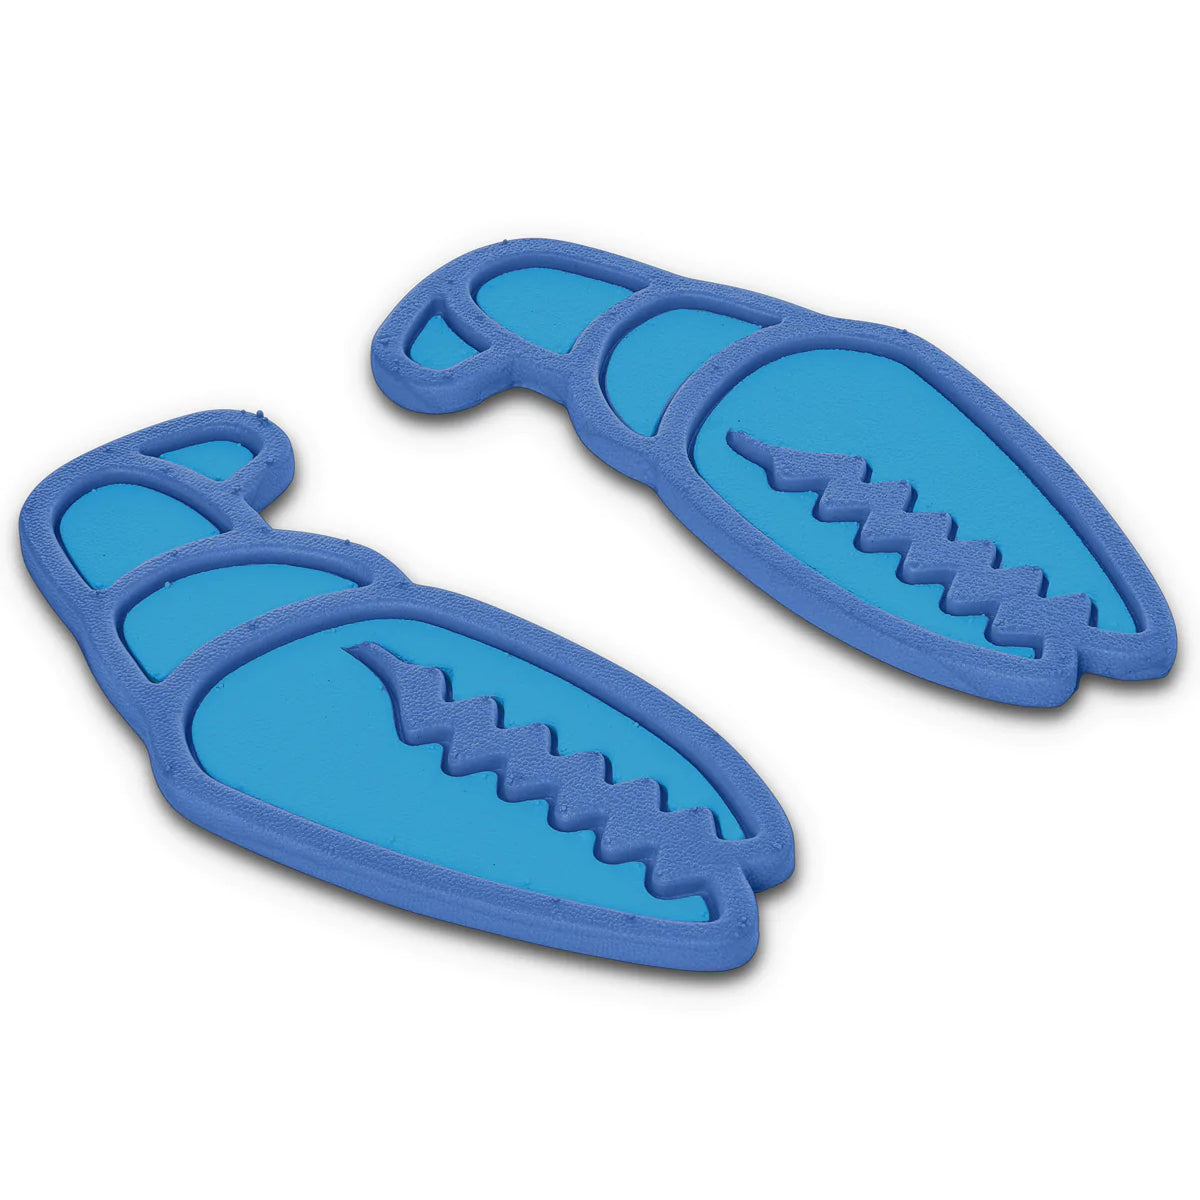 Double Blue Mega Claw Crab Grab Snowboard Traction Pads